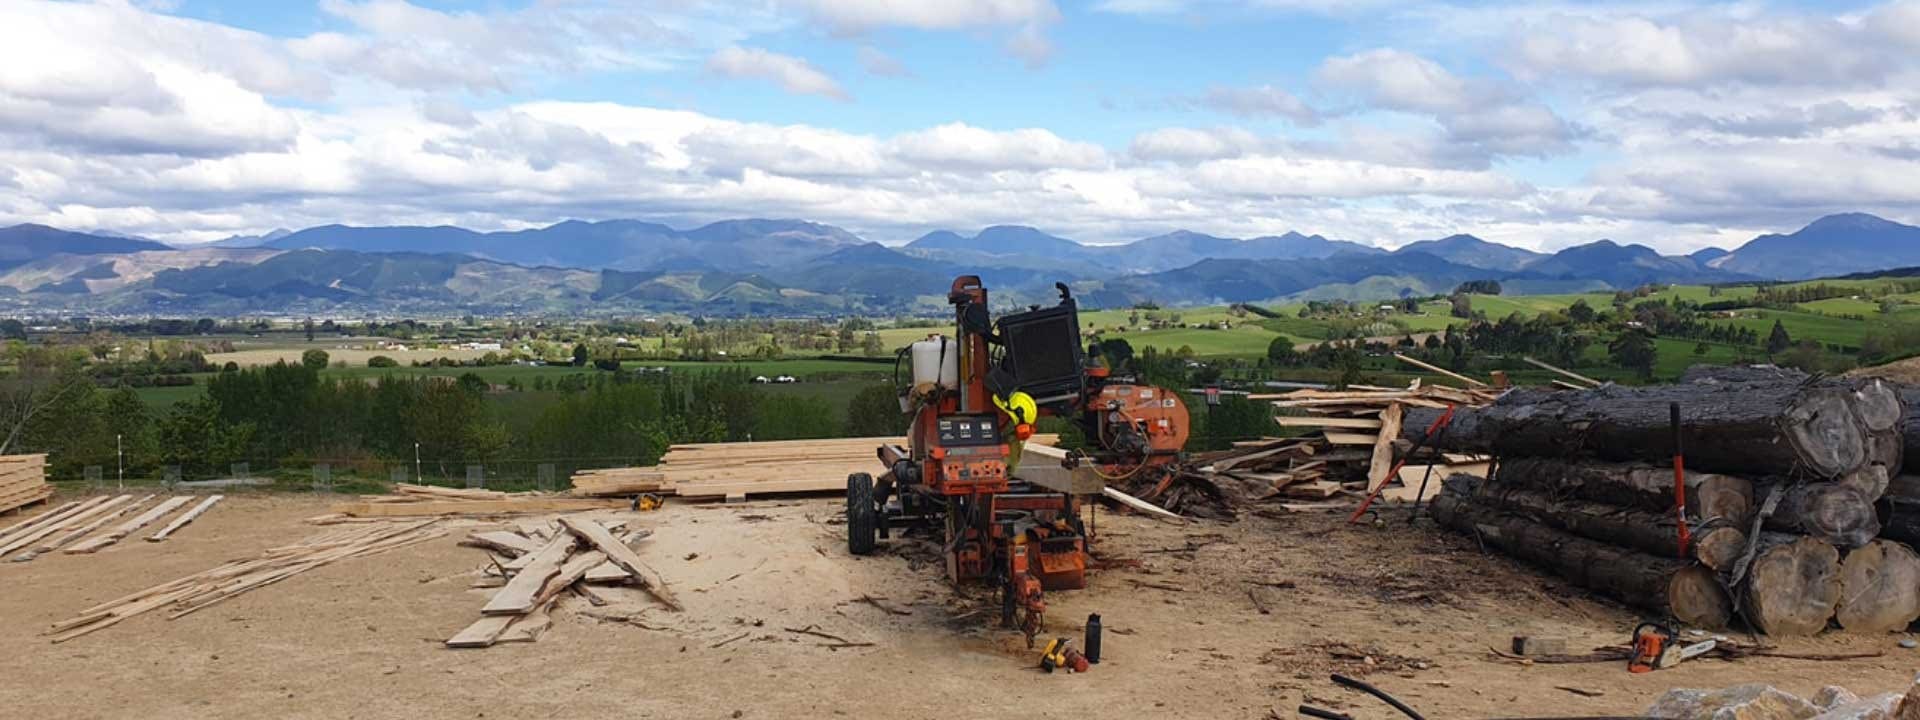 Milling Eucalyptus in the South Island of New Zealand 